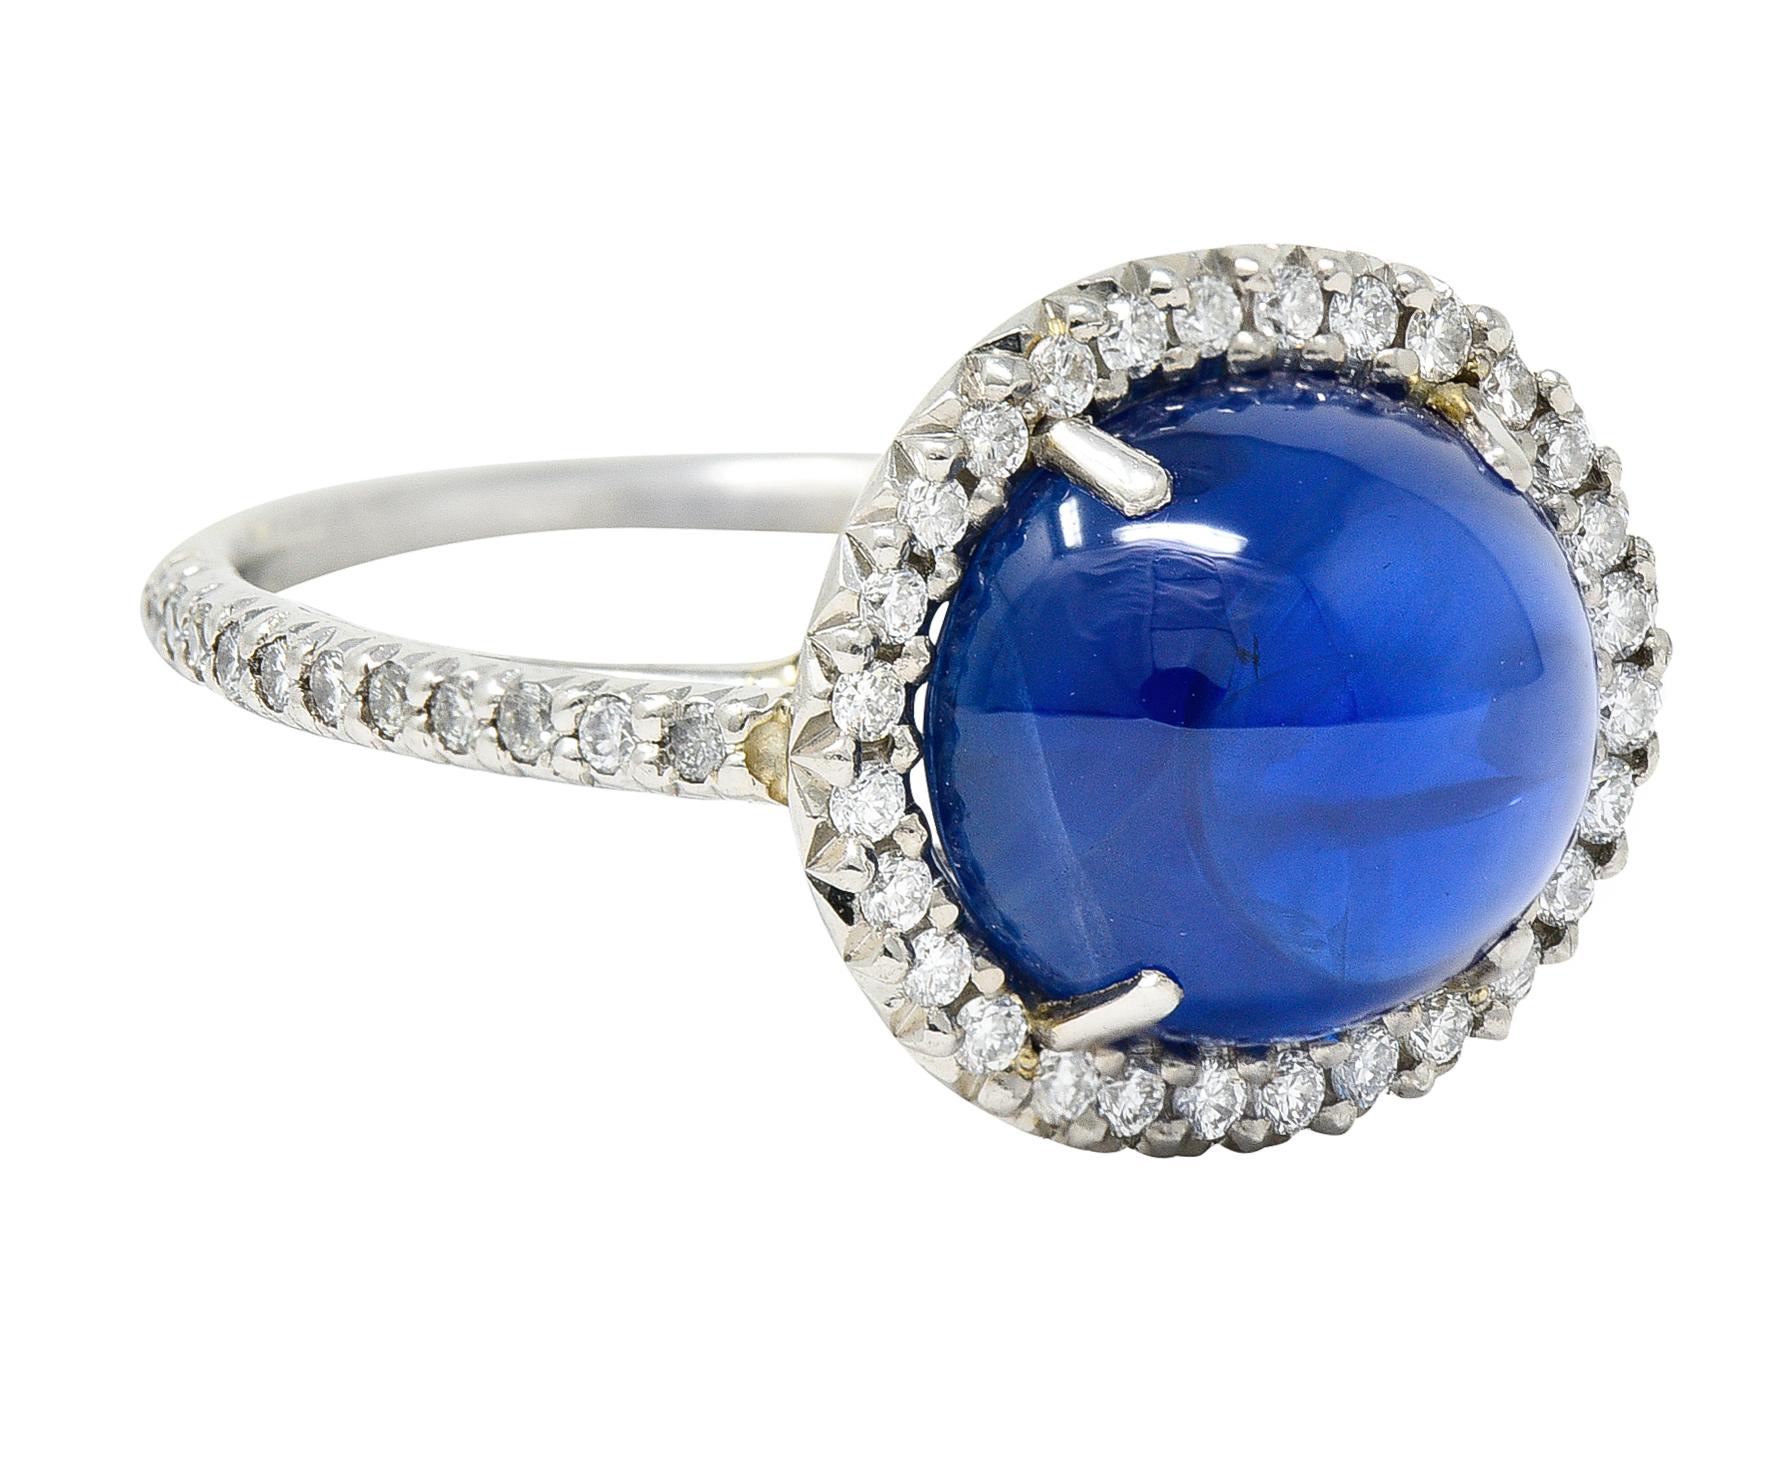 Featuring an oval Ceylon sapphire cabochon weighing approximately 7.19 carats

Royal blue and translucent with natural inclusions with no indications of heat - Sri Lankan origin

Surrounded by a round brilliant cut diamond halo and